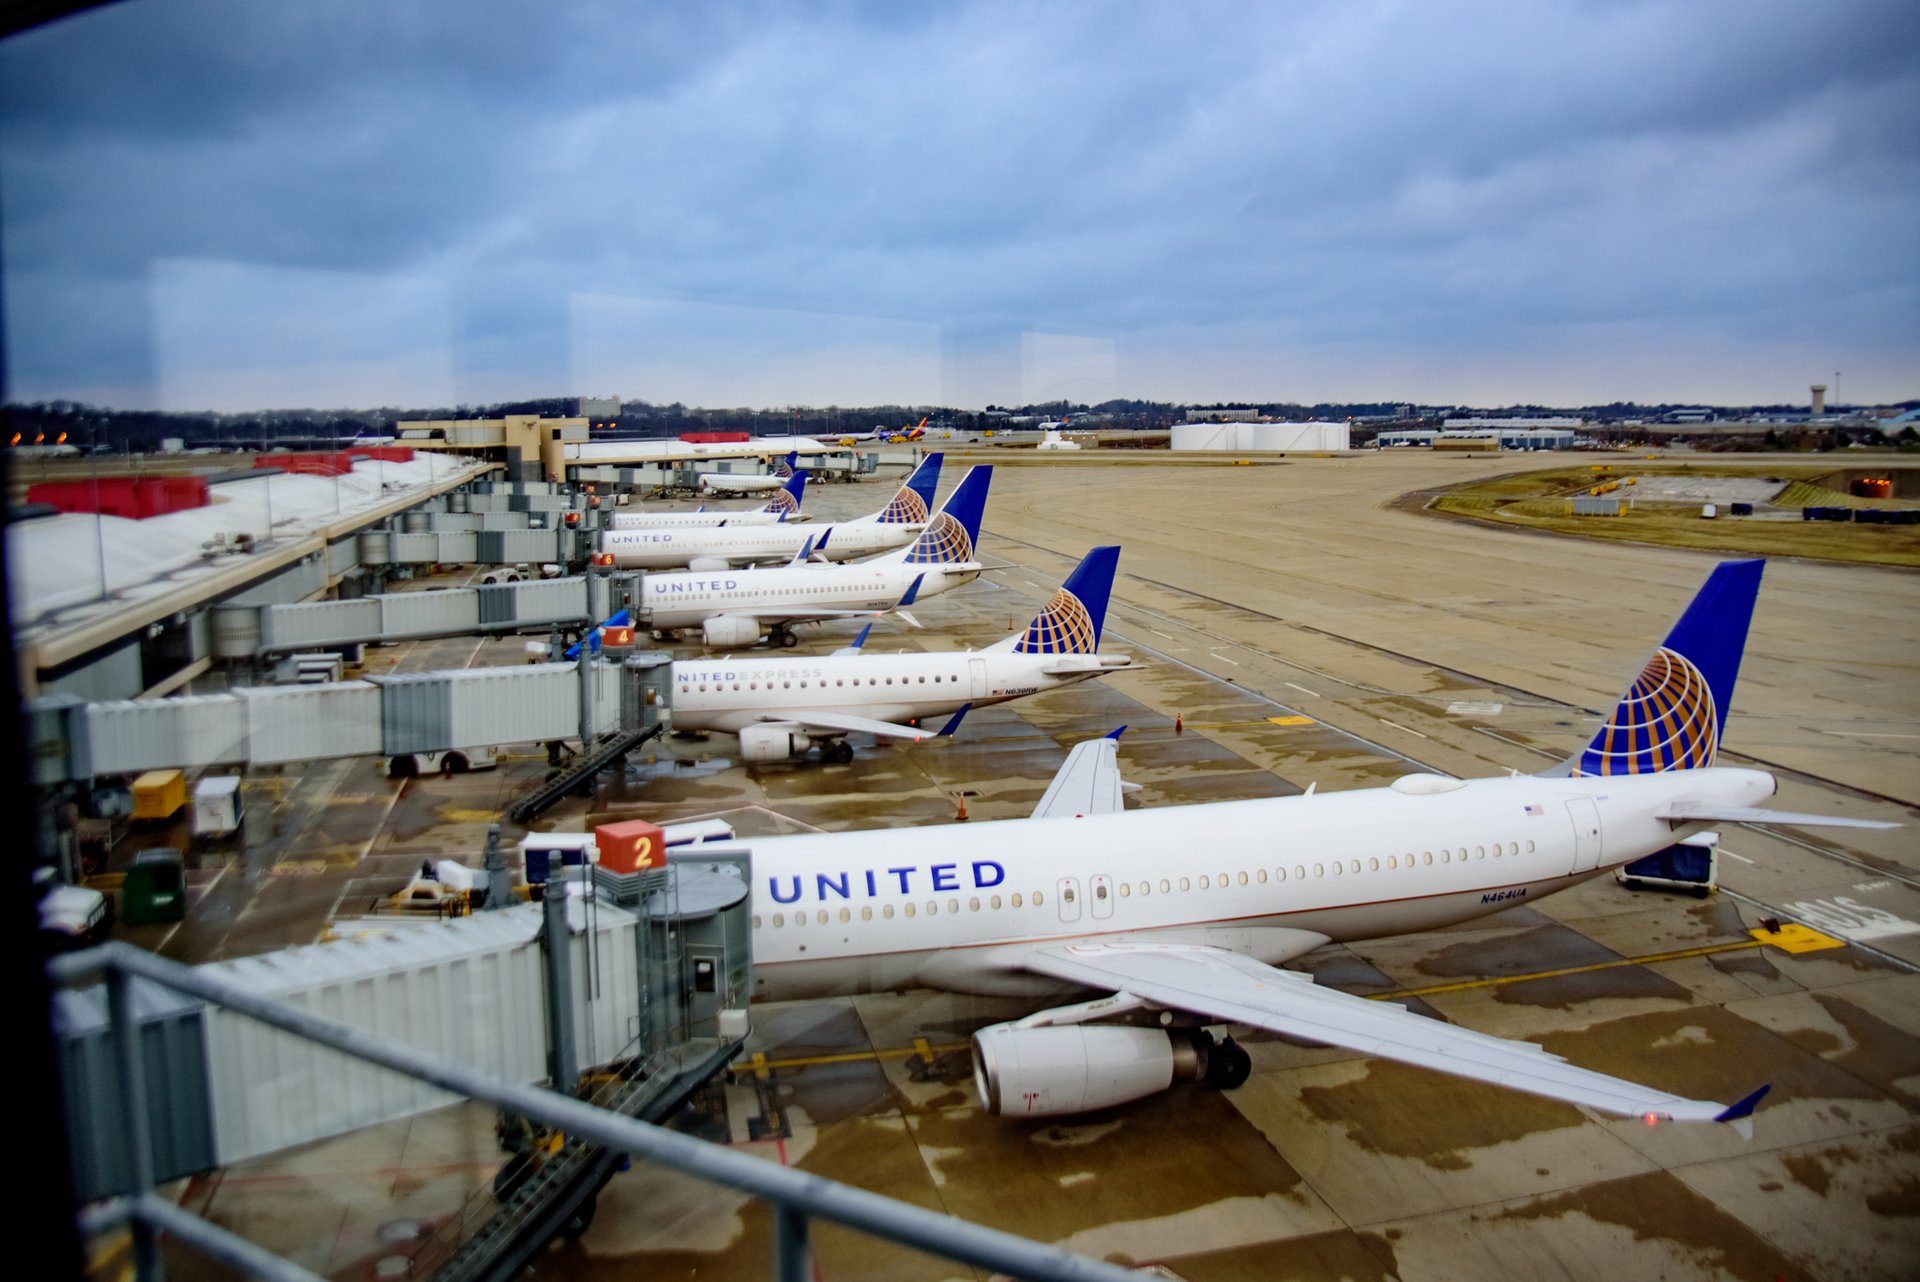 UNITED EXPANDS NONSTOP SERVICE TO SAN FRANCISCO